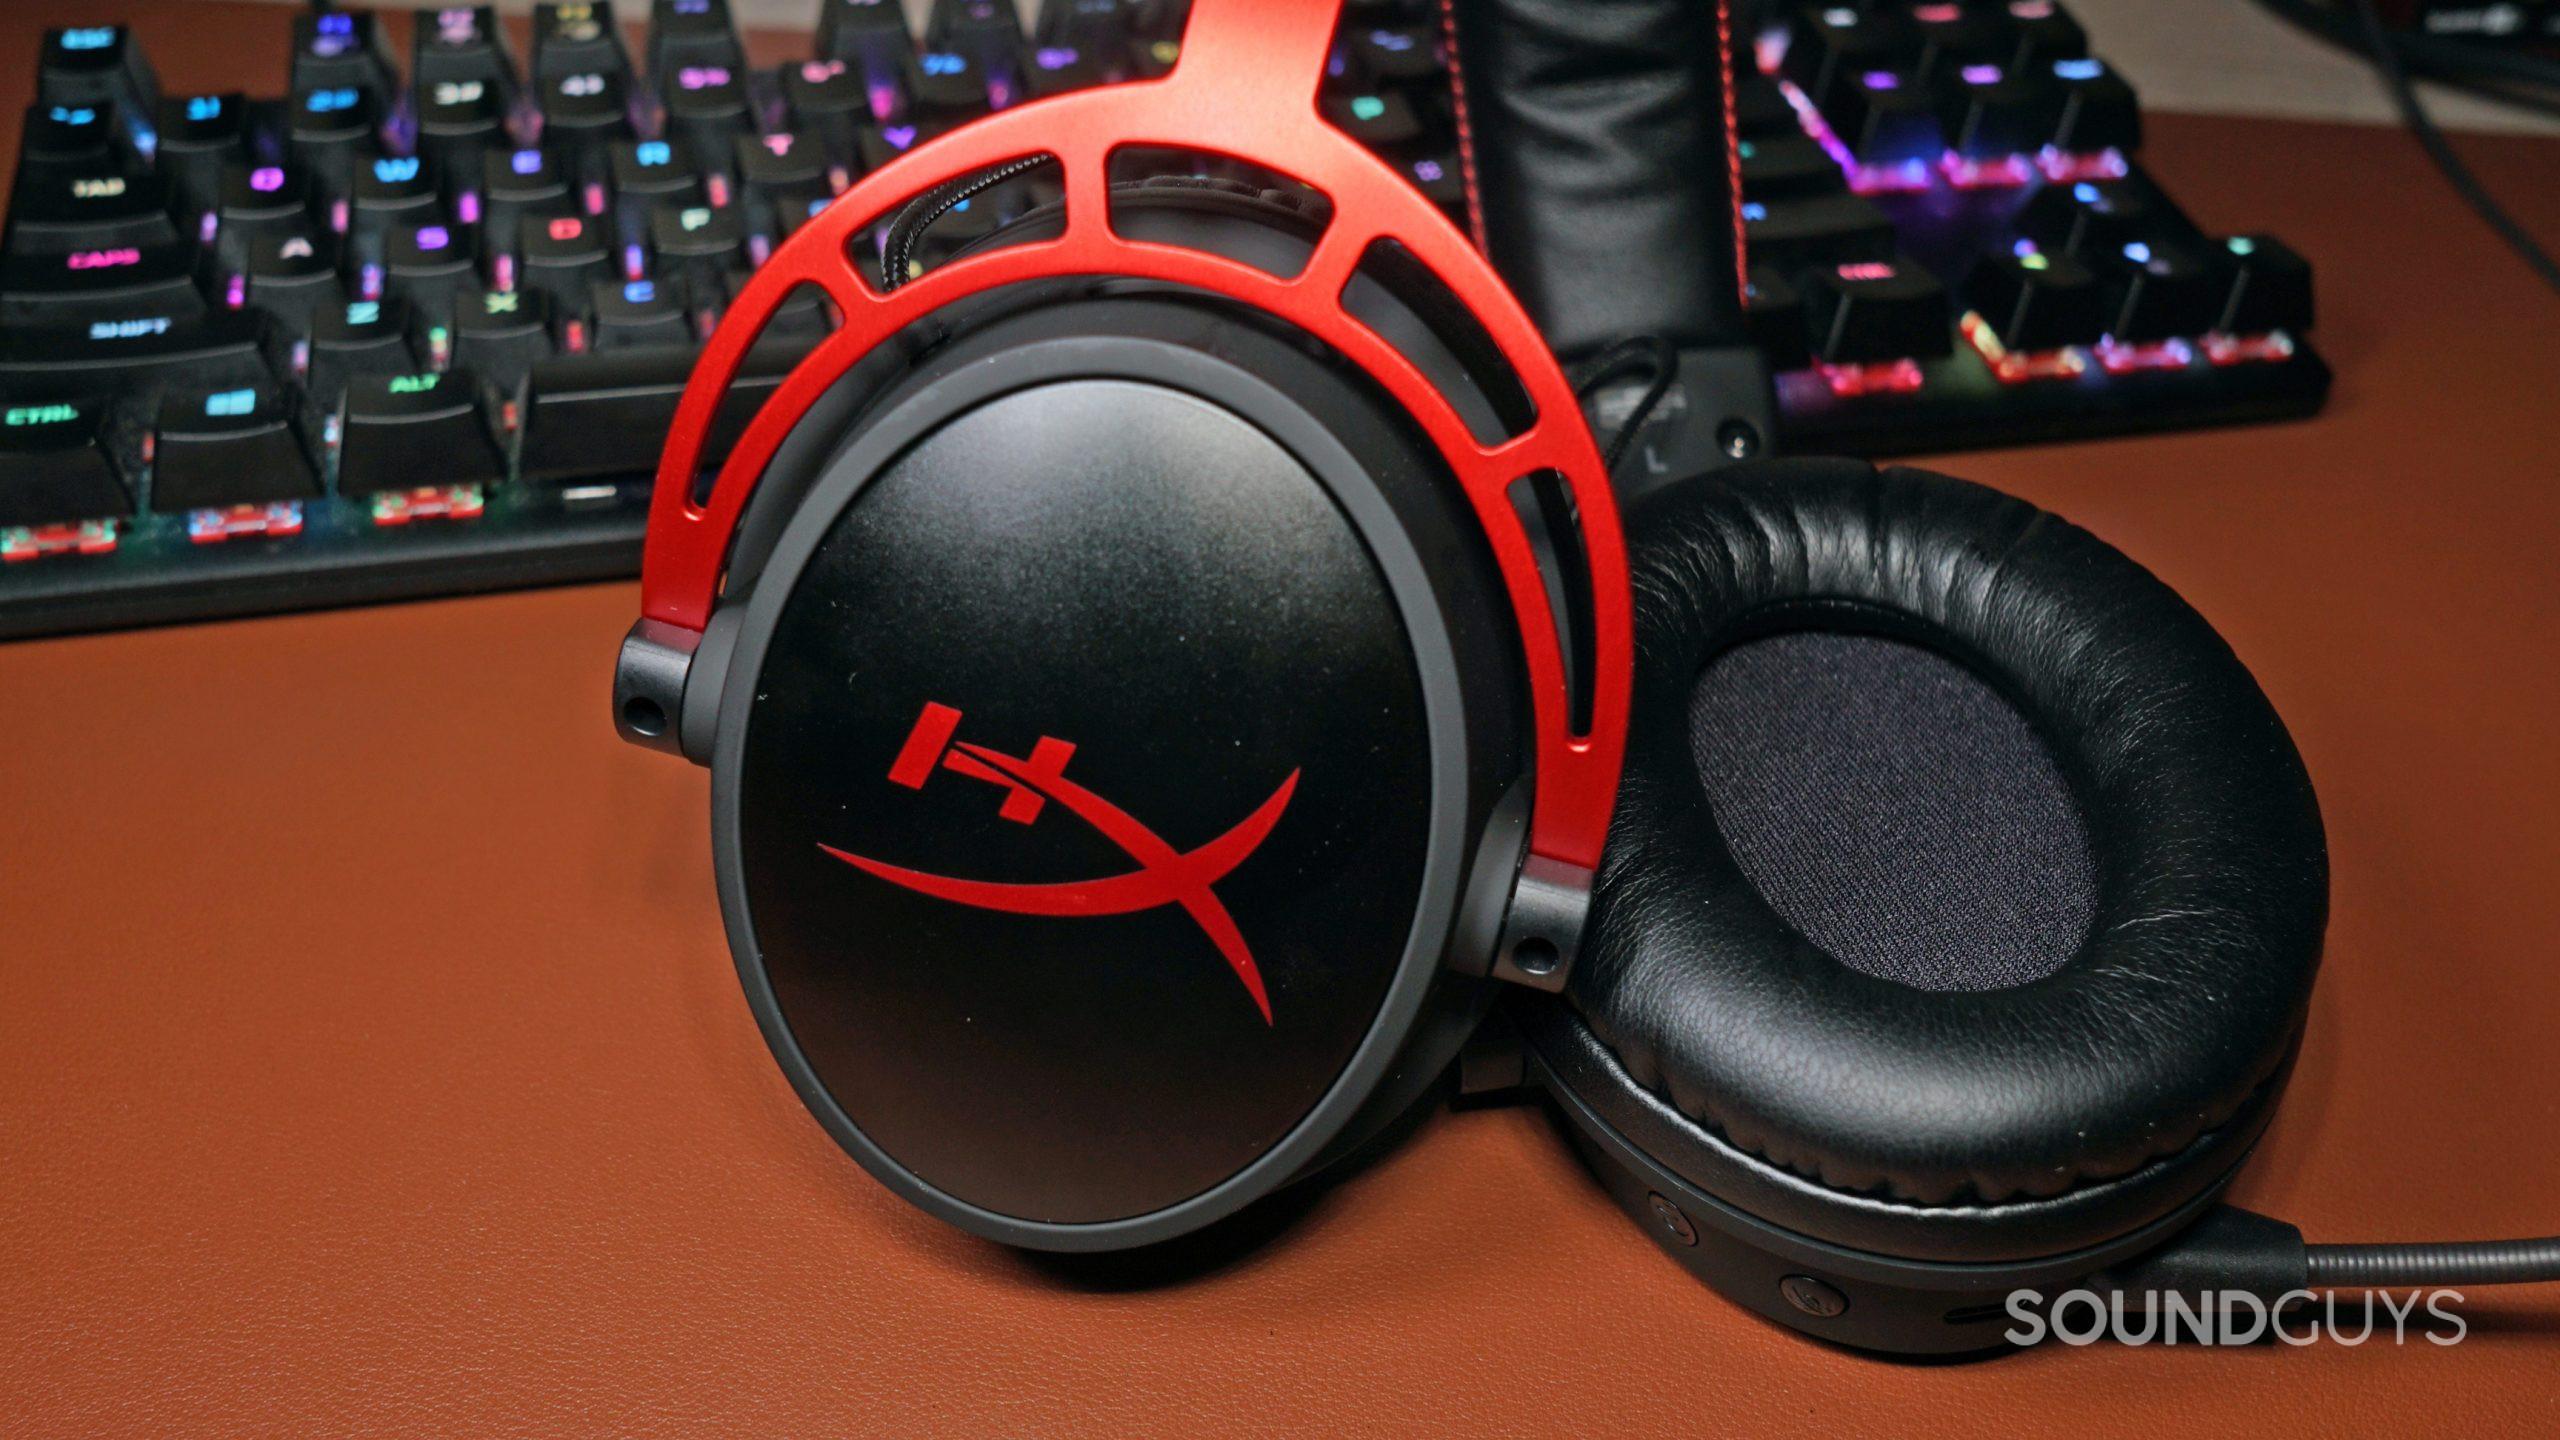 The HyperX Cloud Alpha Wireless gaming headset lays on a leather surface in front of a HyperX mechanical gaming keyboard.